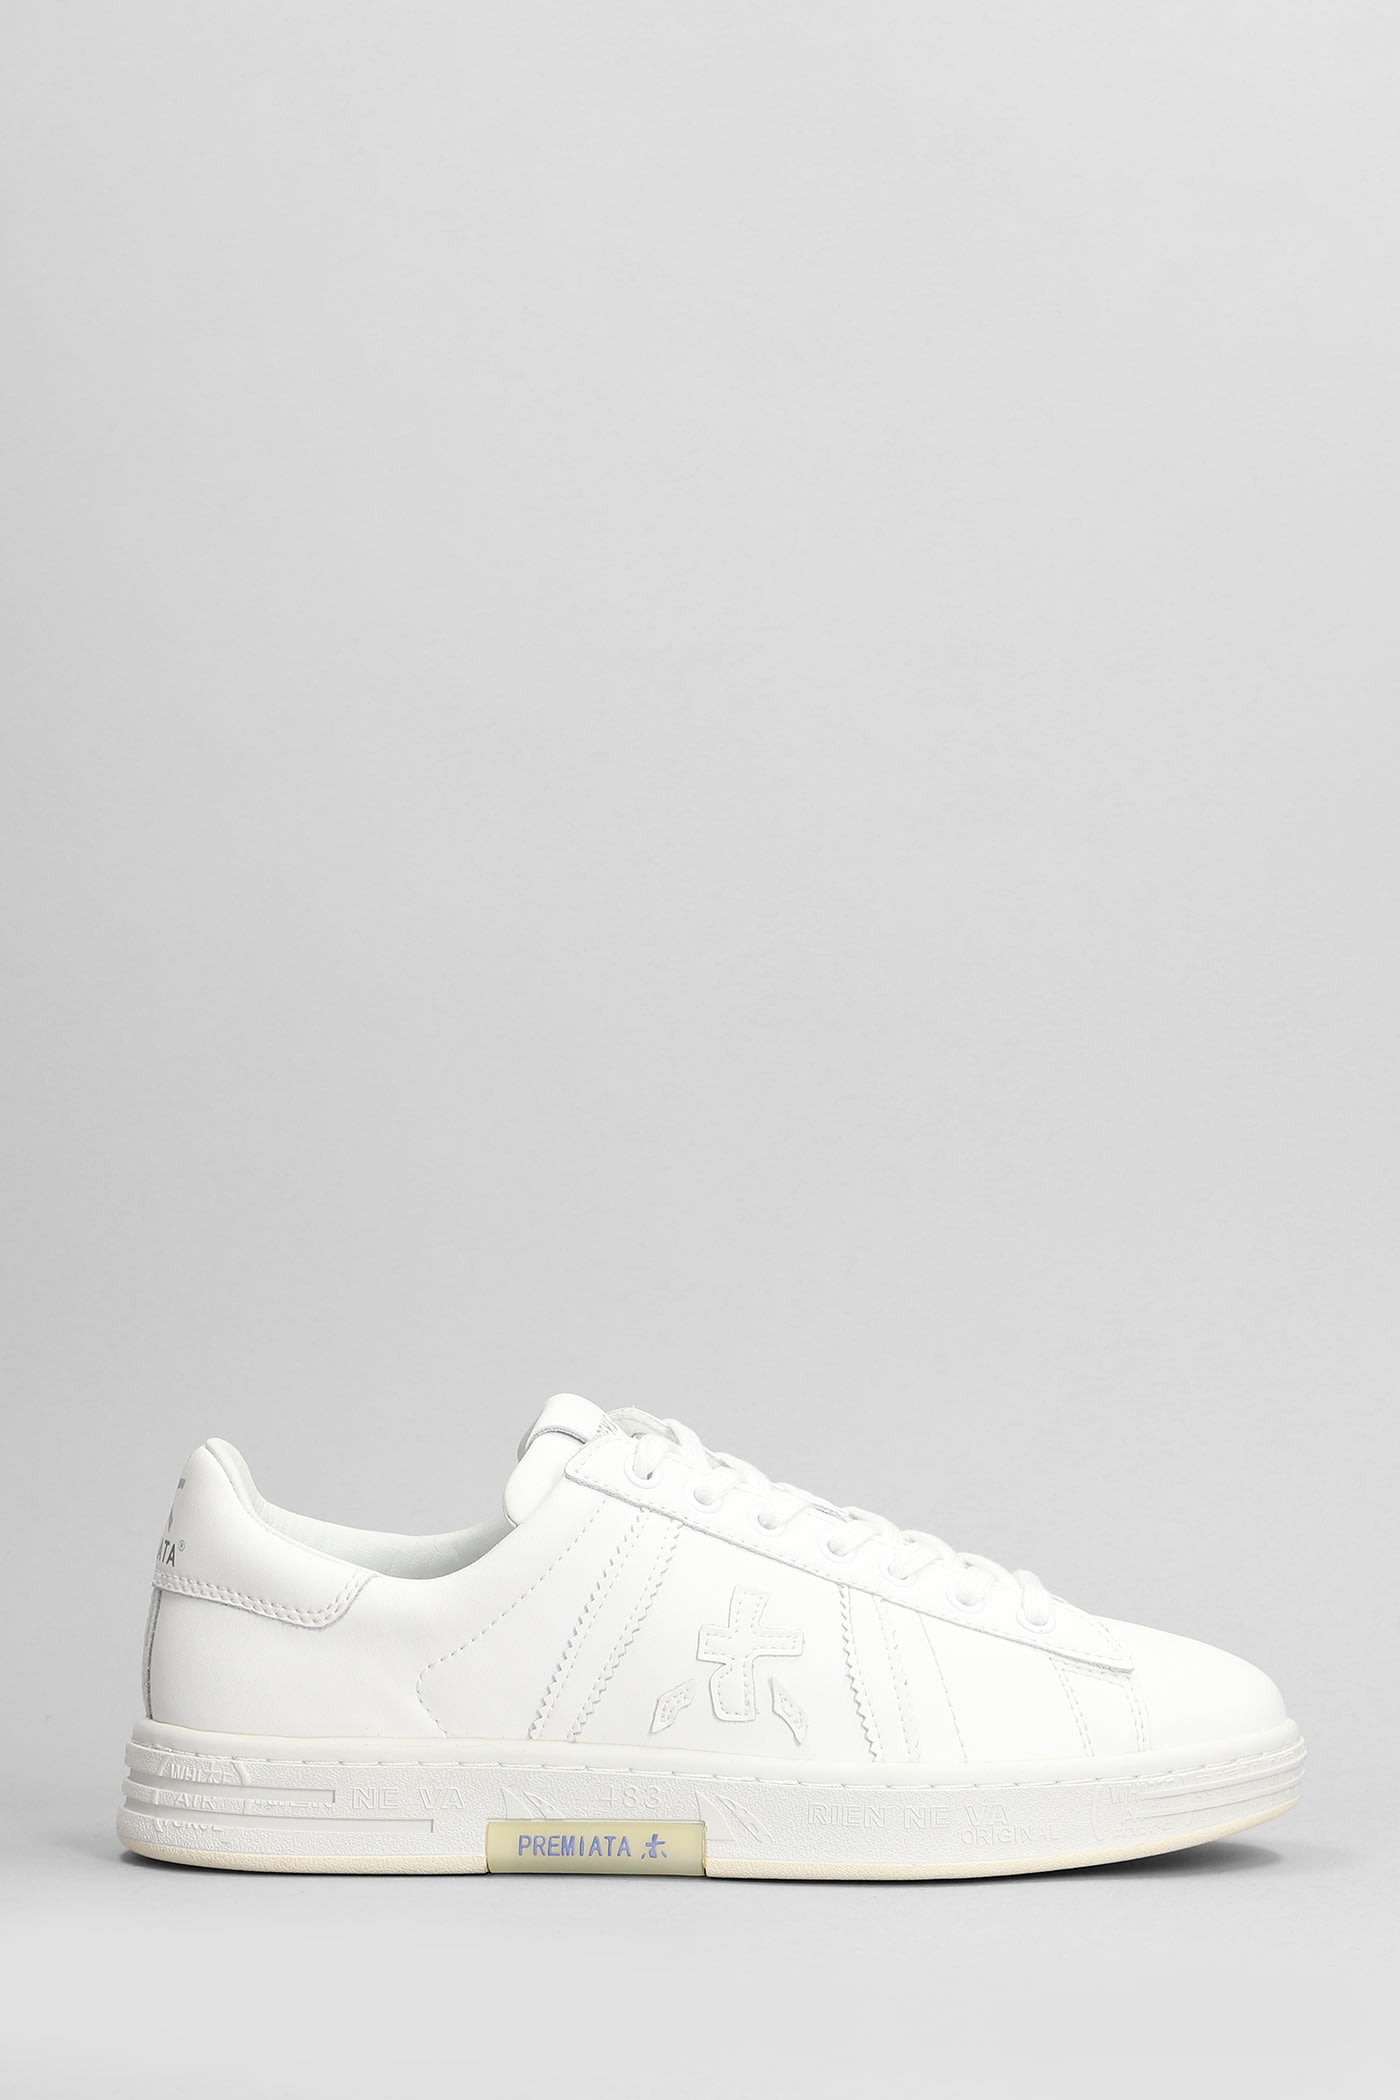 Premiata Russell Trainers In White Leather